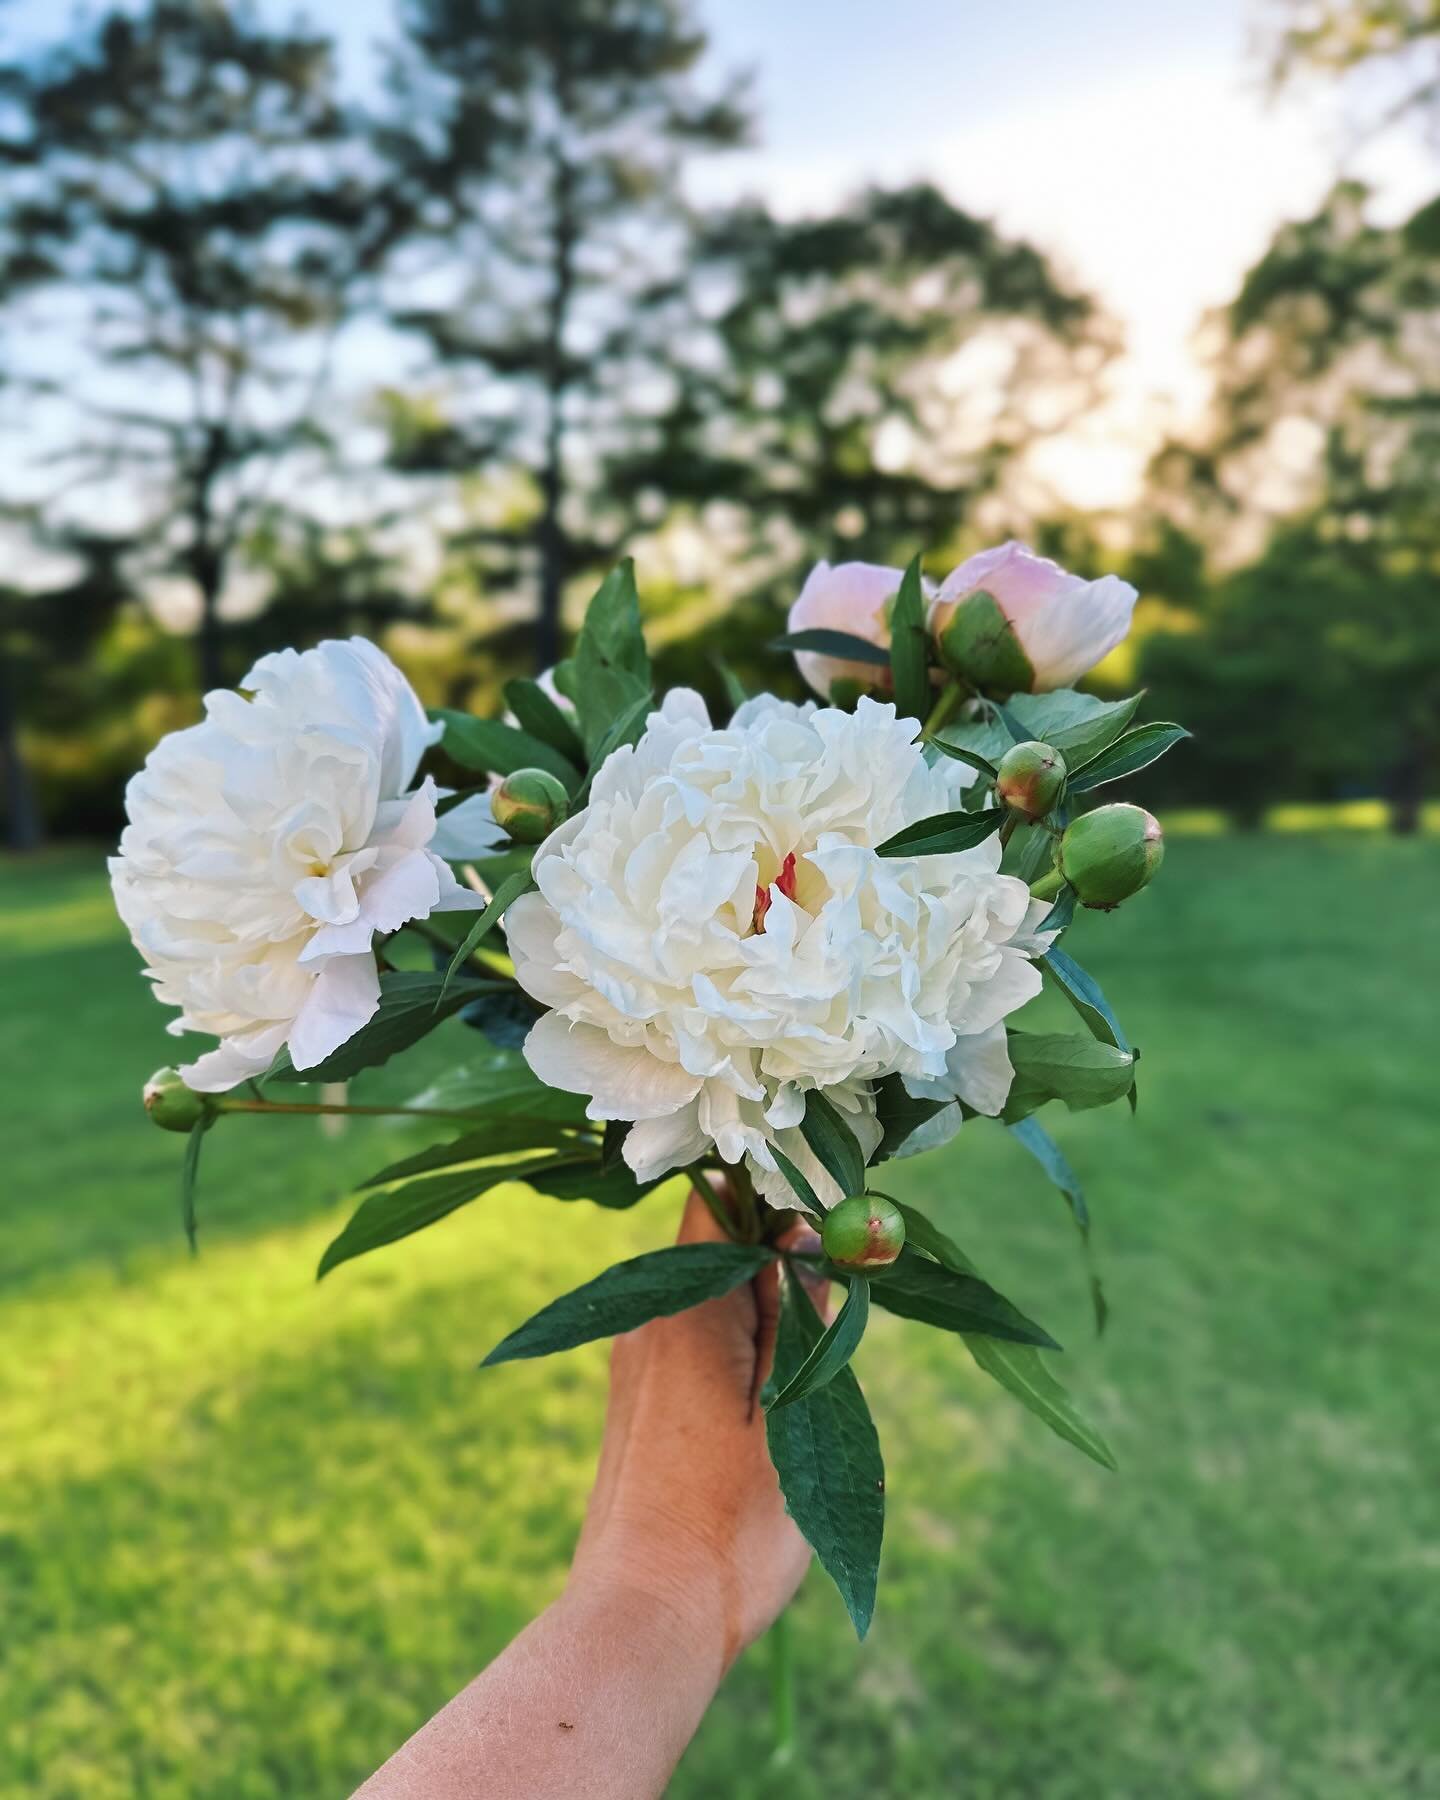 Peonies at golden hour. ✨ So many early spring flowers have such a short blooming season that you have to squeeze all you can out of it. 

P.S. Instagram is absolutely ridiculous now. To the like 20 people who will probably see this post (🙄), thank 